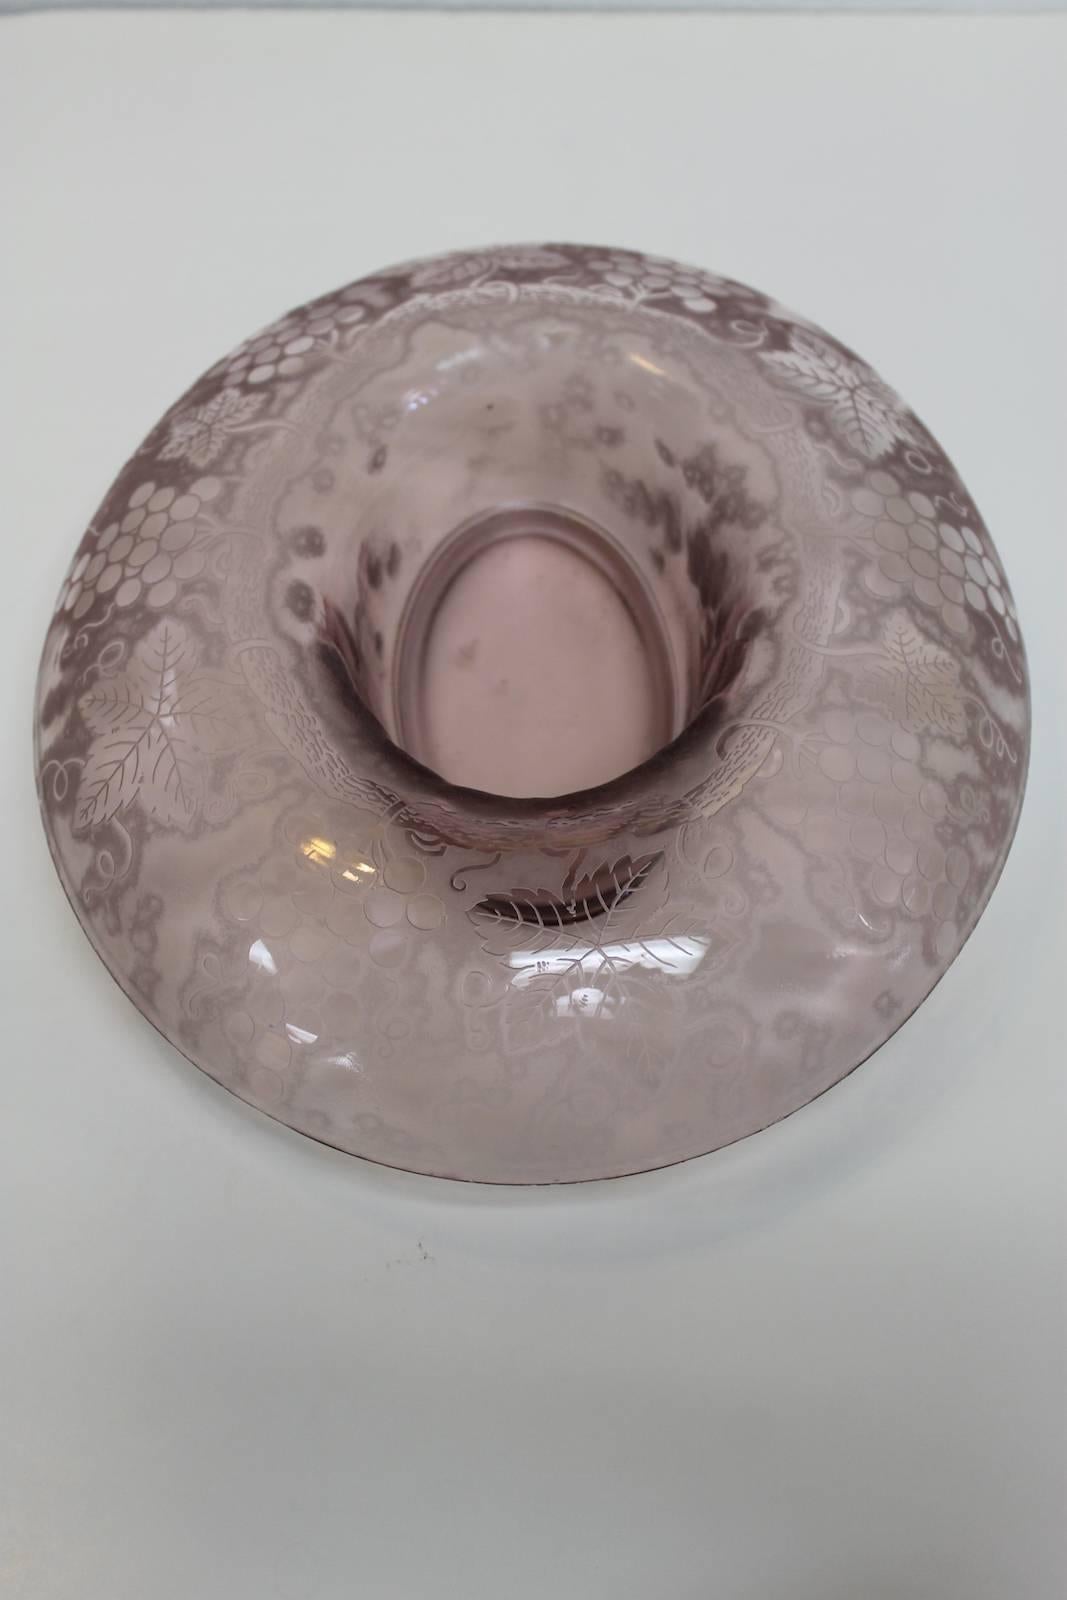 Beautiful etched bowl with grapes. Bowl measures: 13.5